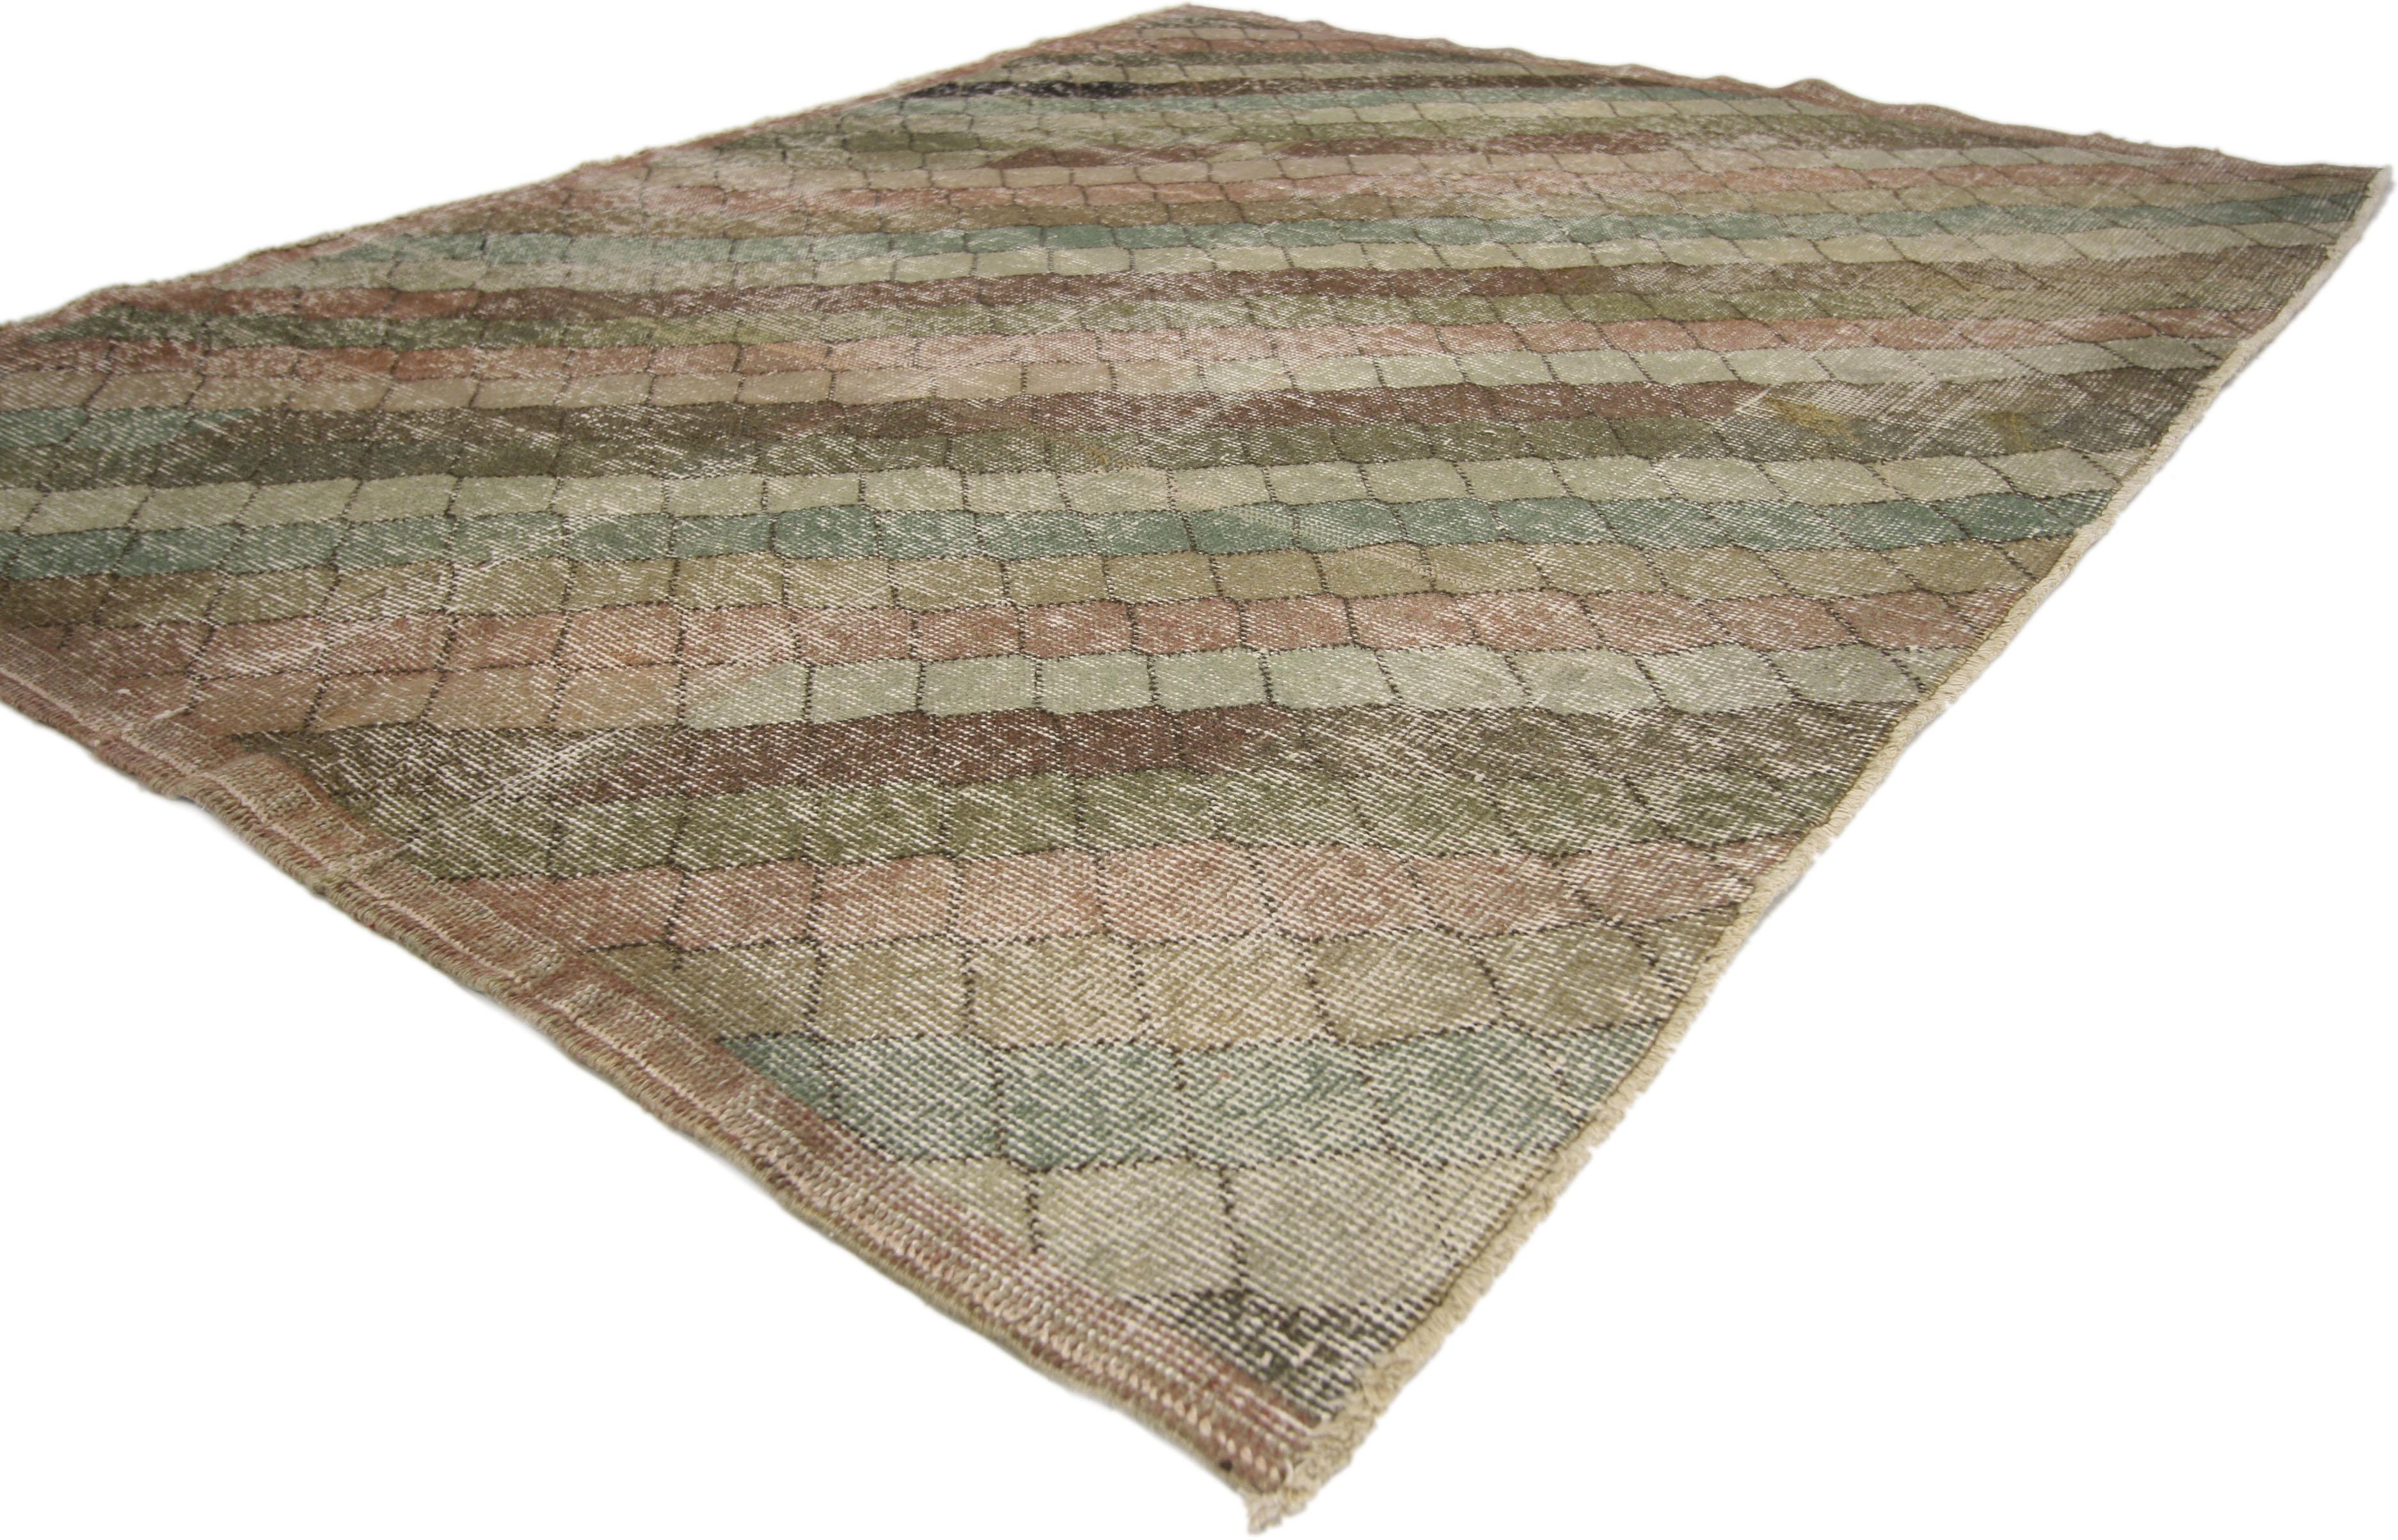 51009 Zeki Muren Distressed Vintage Turkish Sivas Rug with Rustic Art Deco Style. Warm and stylize combined with a bold, yet subtle pattern, this hand knotted wool distressed vintage Turkish Sivas rug embodies Art Deco style with a modern artisan